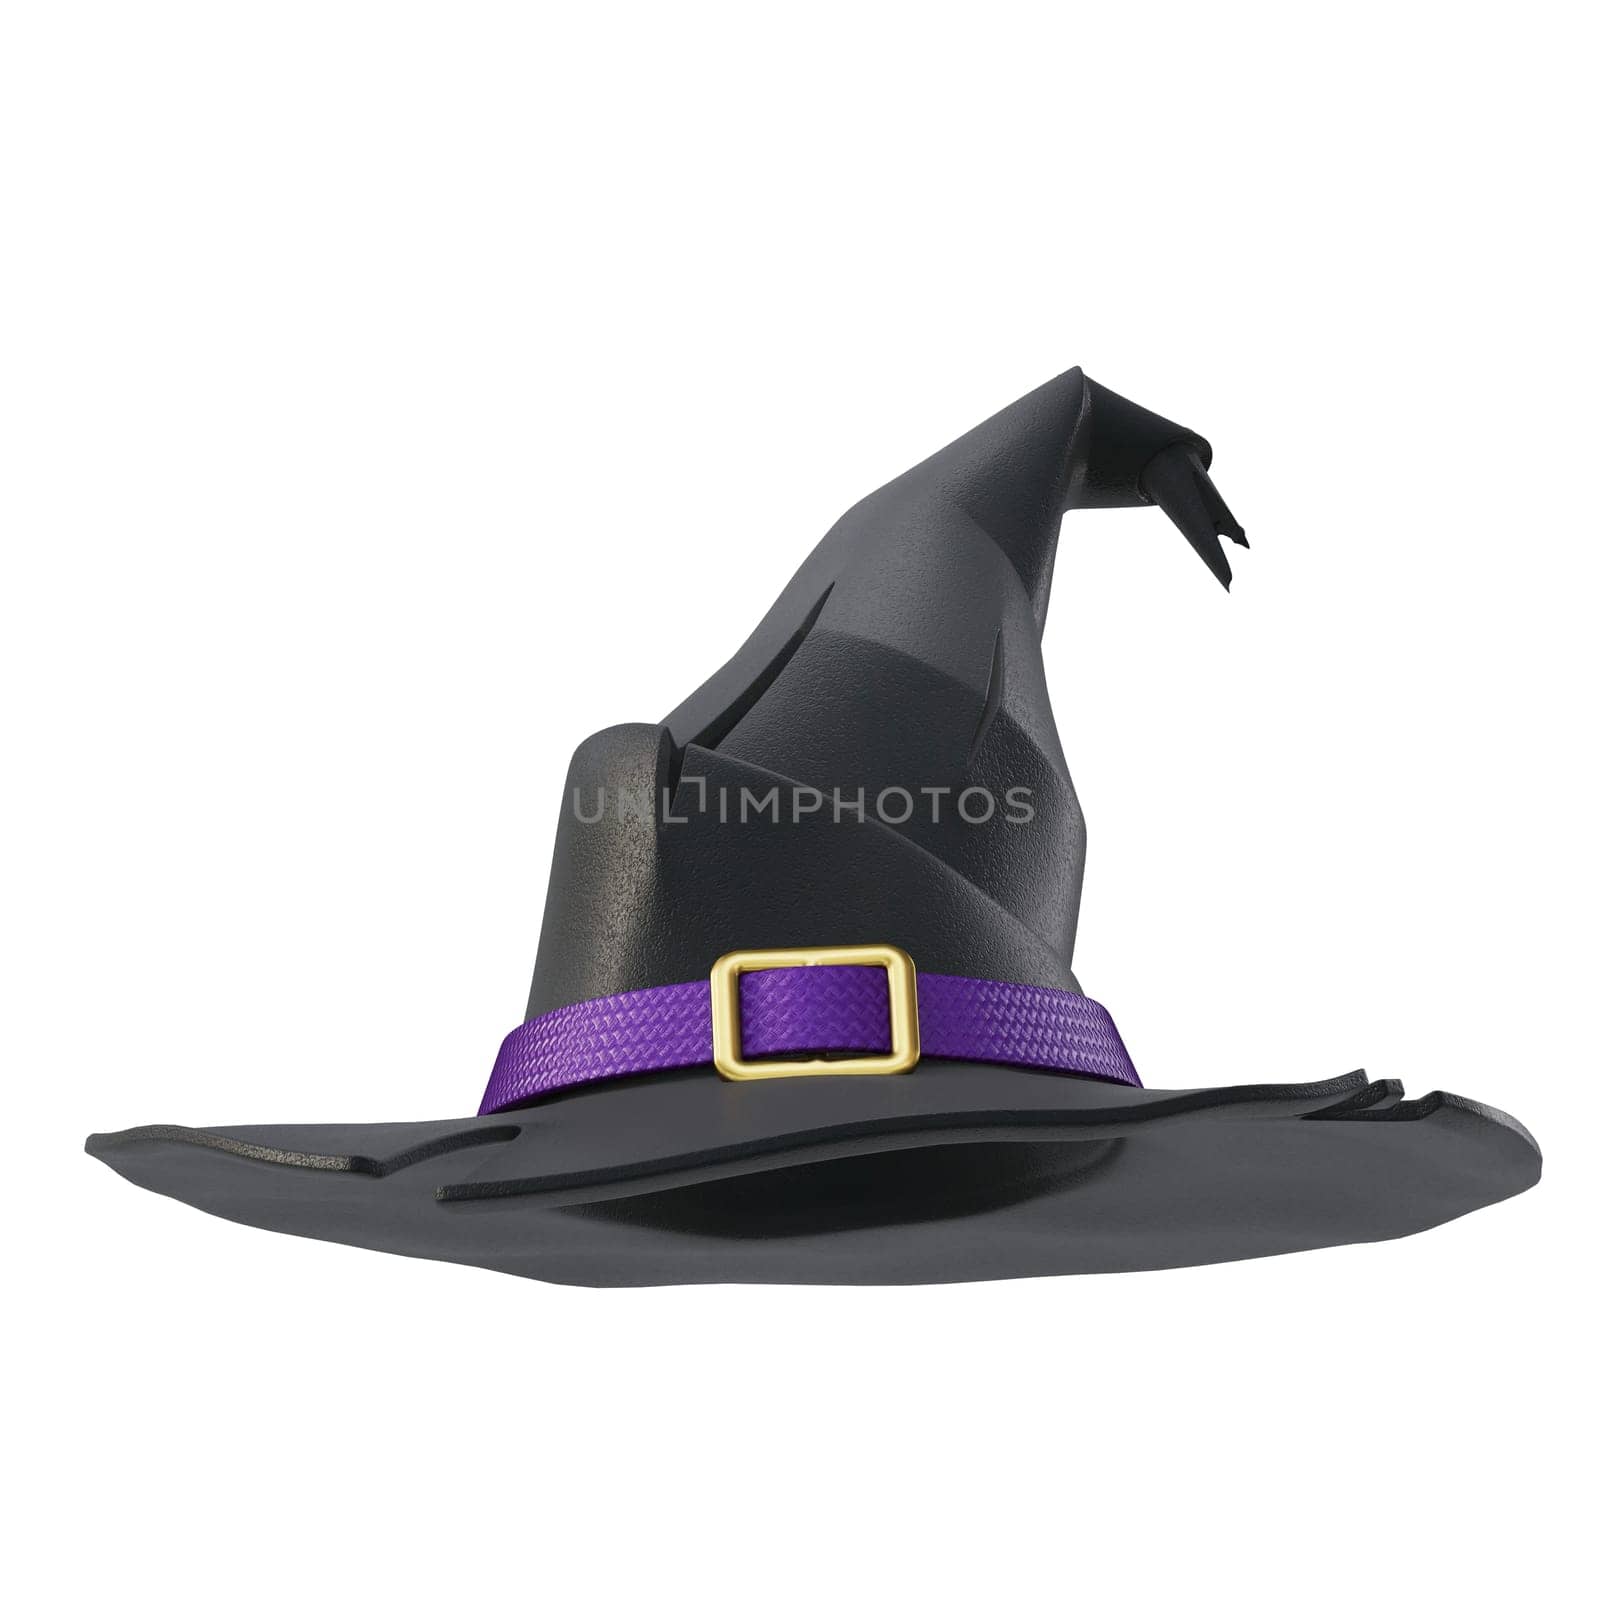 Witch hat 3D by djmilic